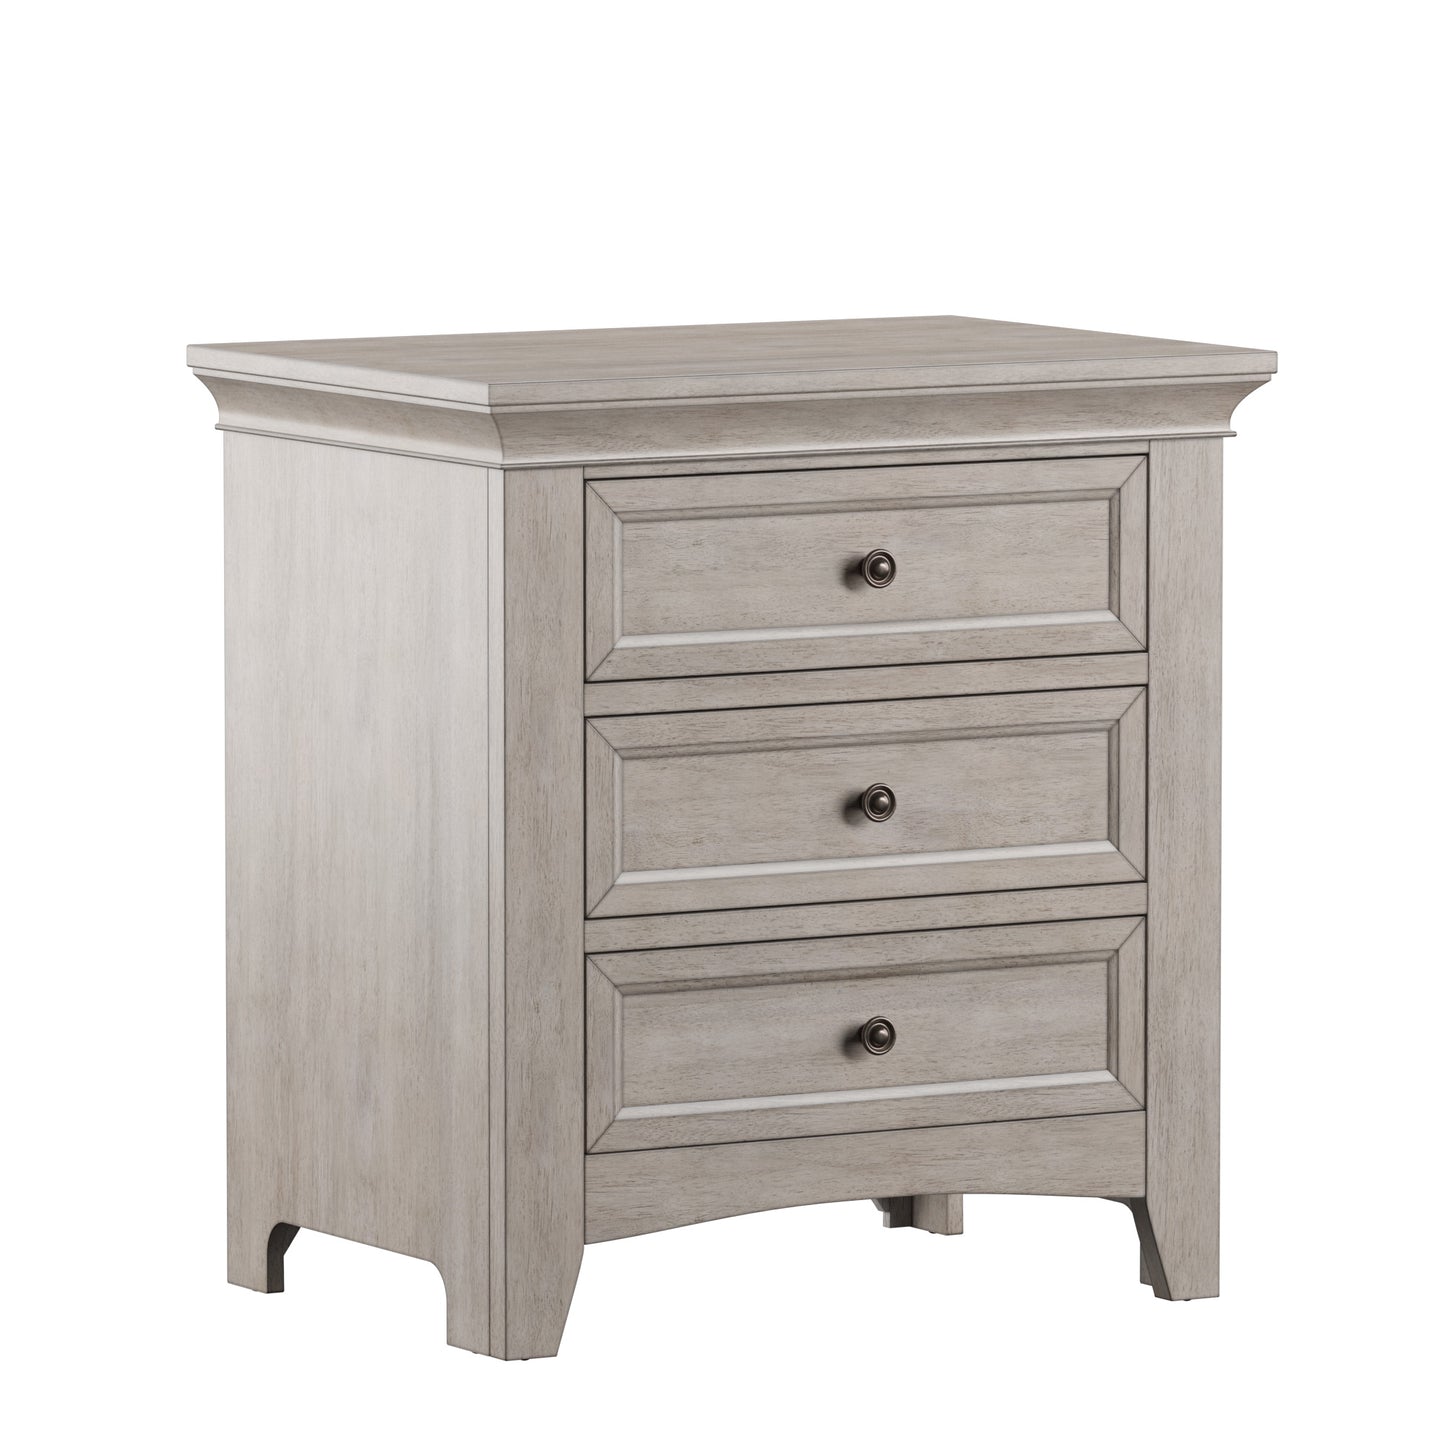 3-Drawer Wood Modular Storage Nightstand with Charging Station - Antique White